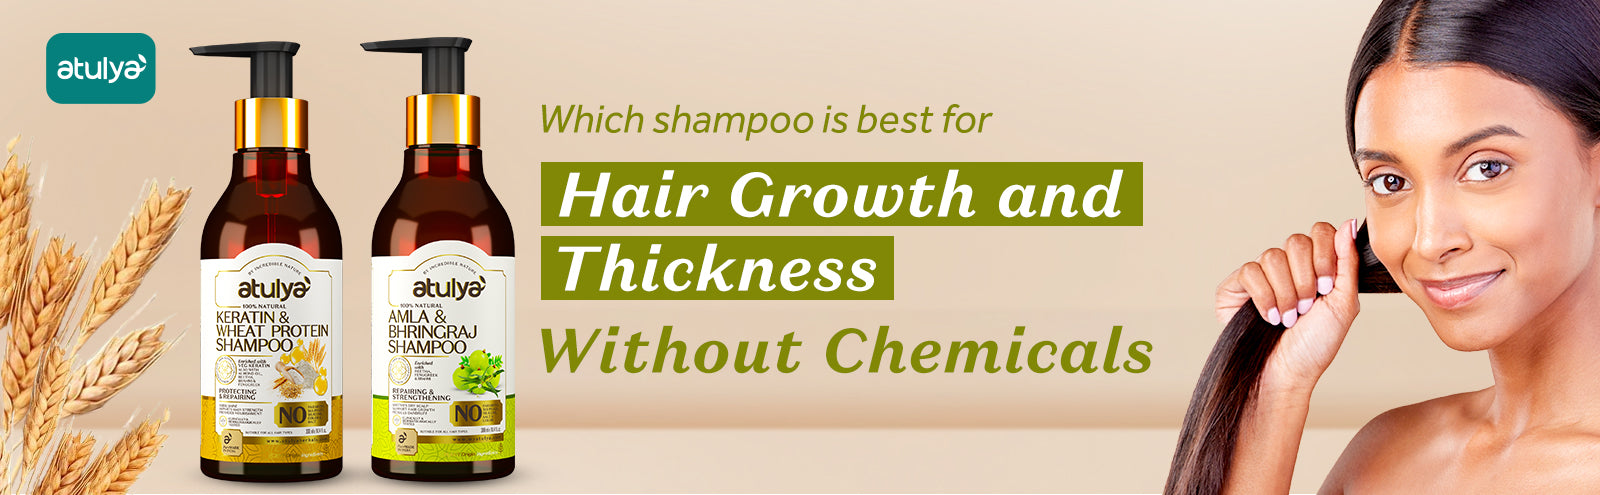 Which shampoo is best for hair growth and thickness without chemicals